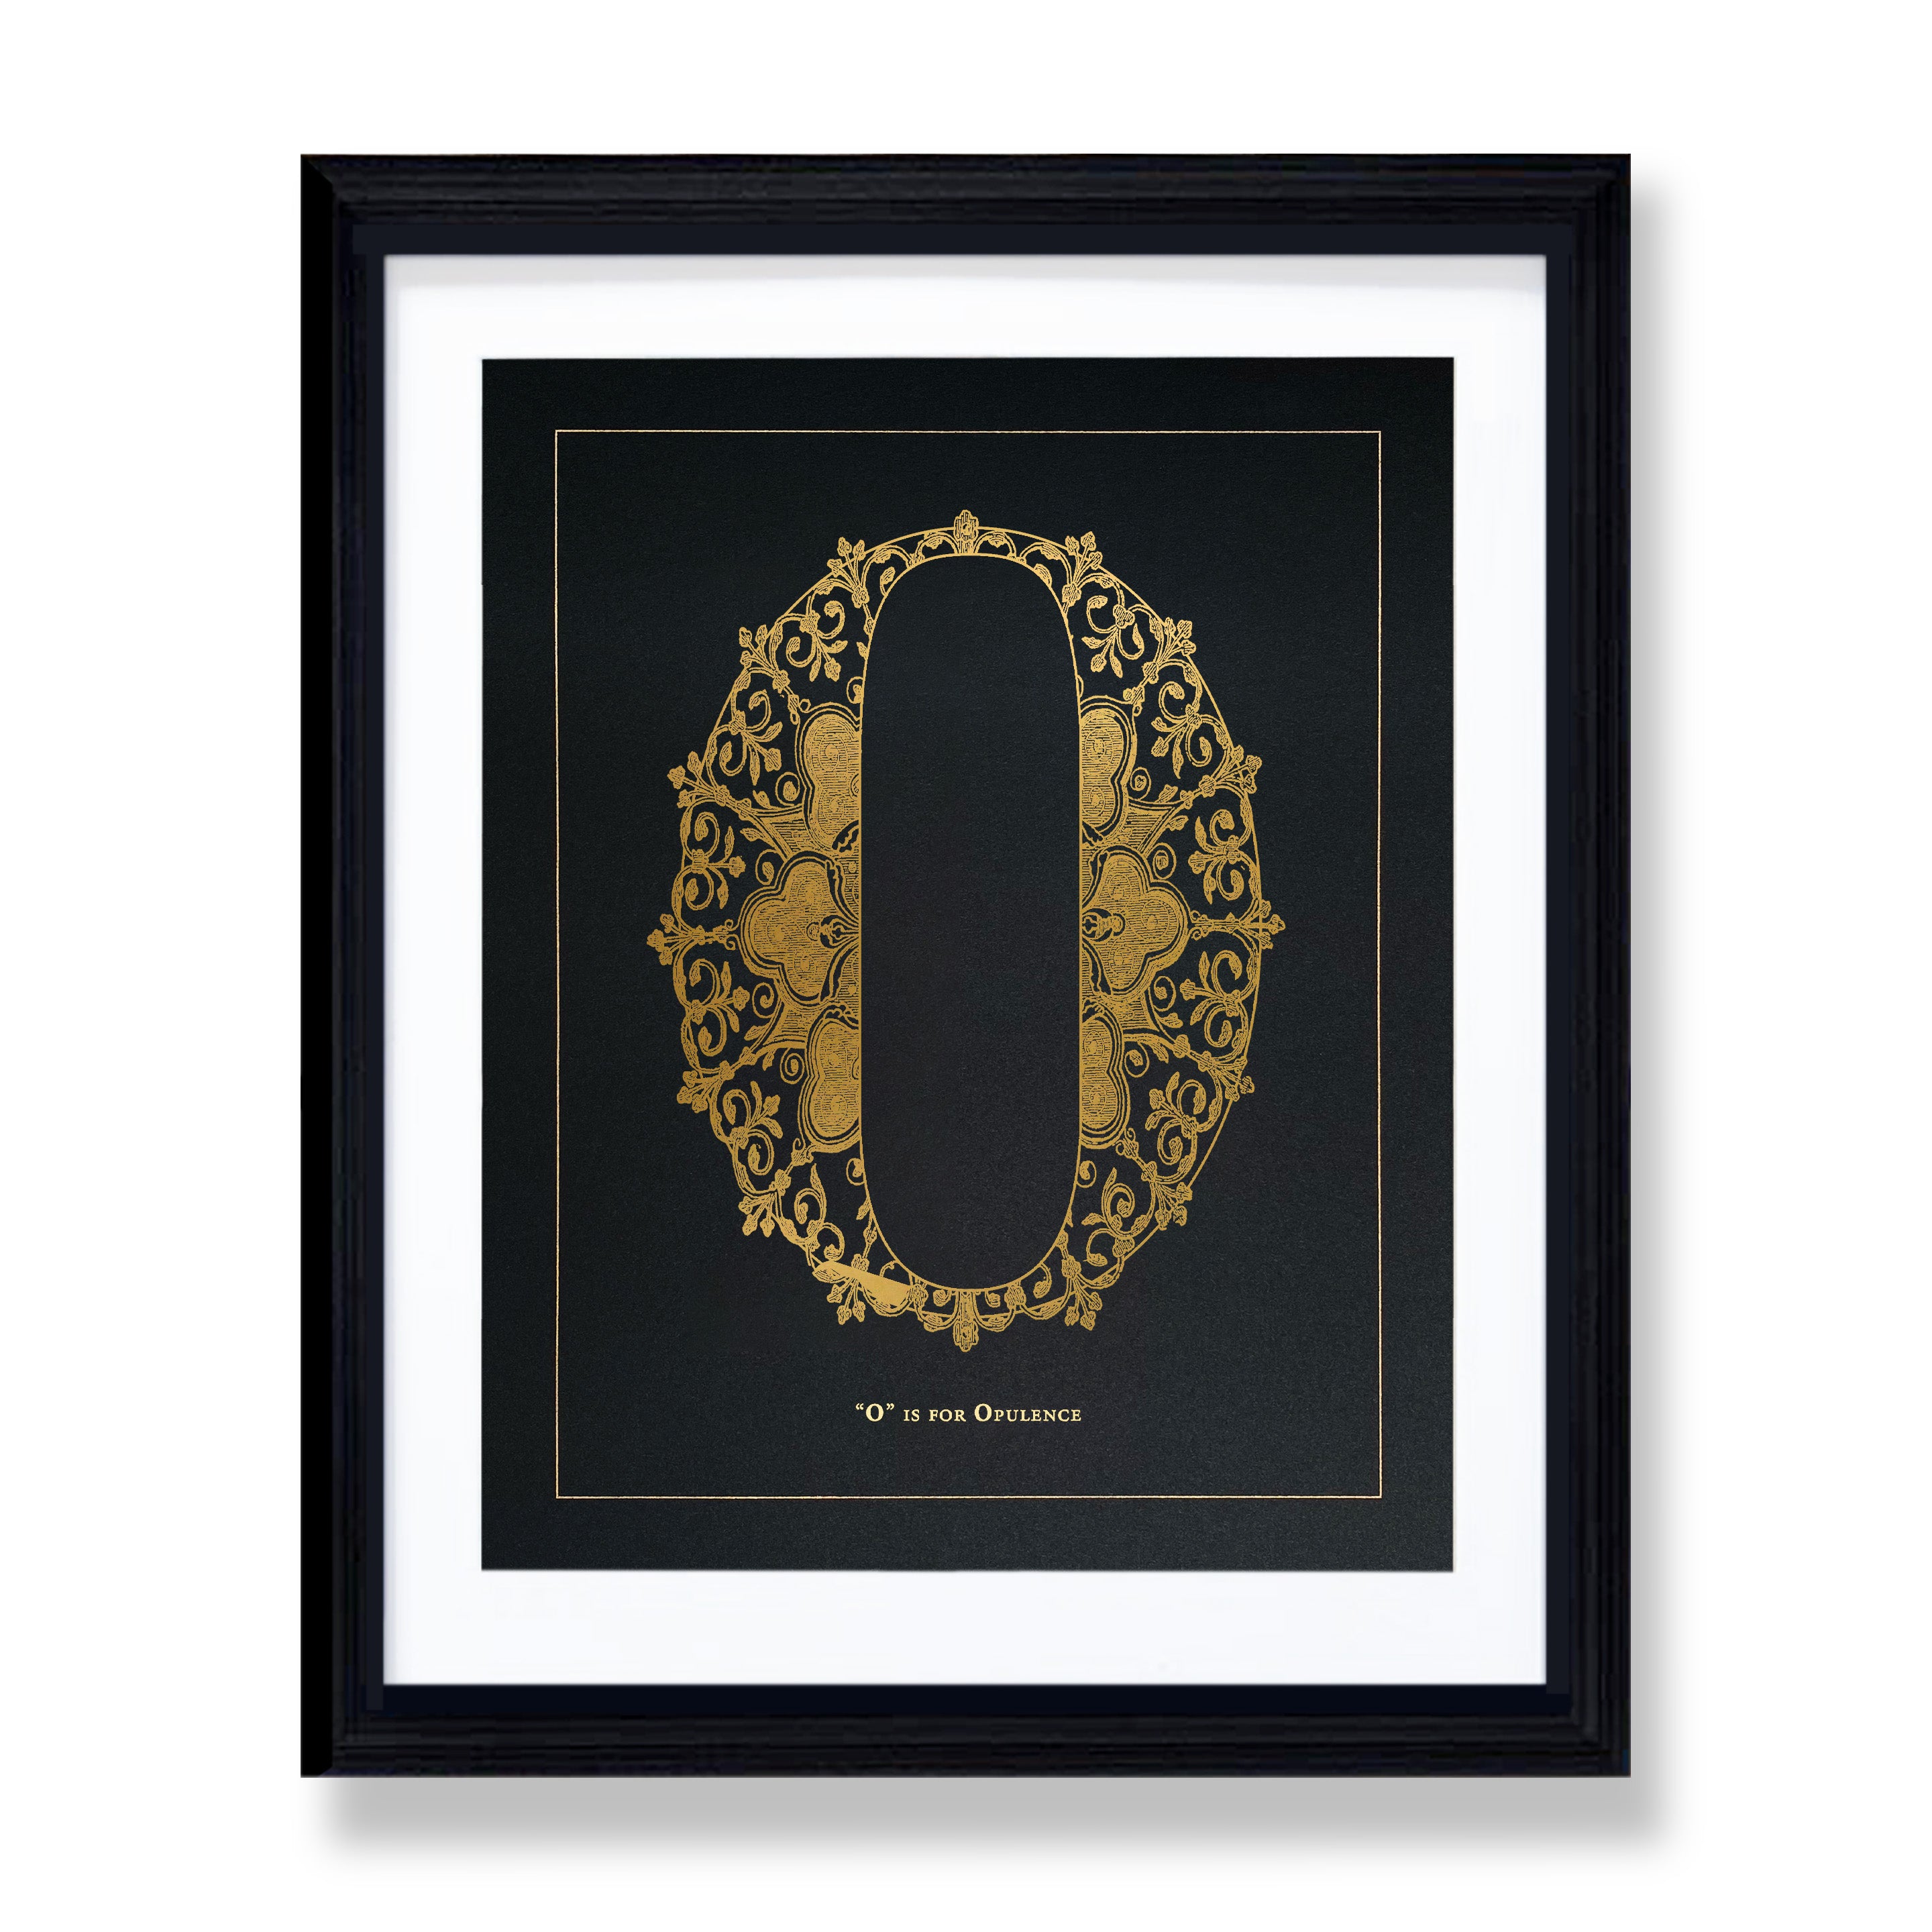 "O" is for Opulence